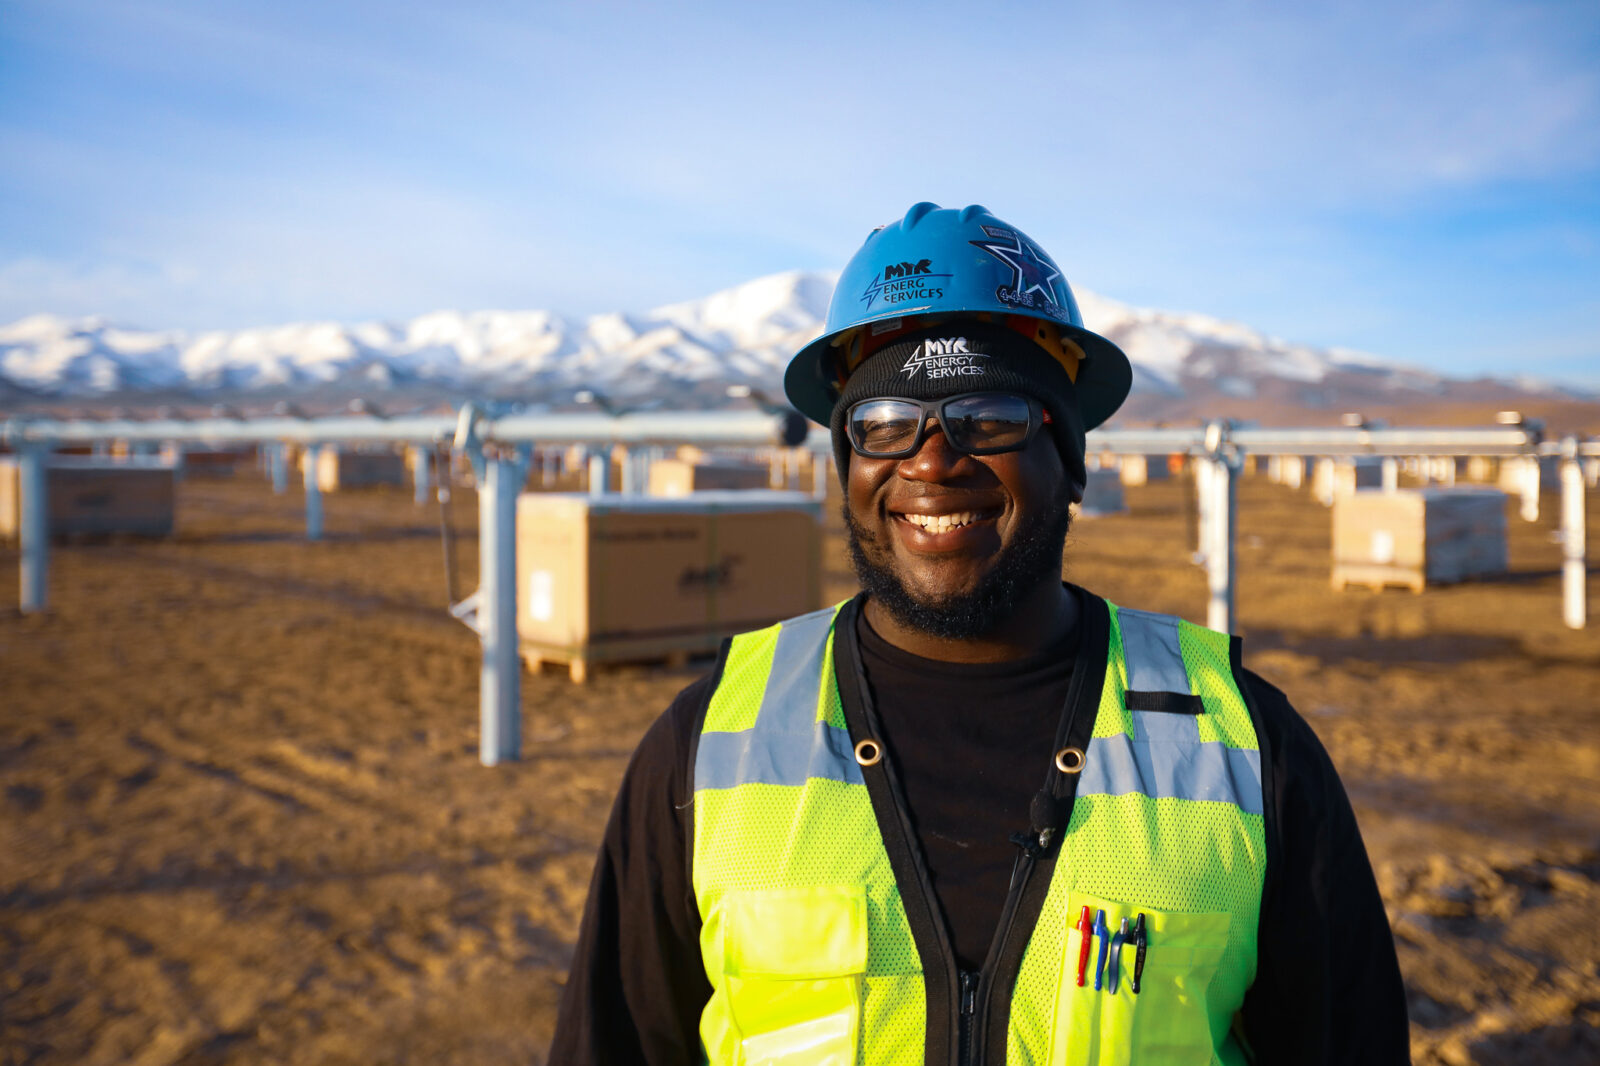 MYRE Energy employee with hard hat and safety glasses smiles for the camera with snowcapped mountains in the distance